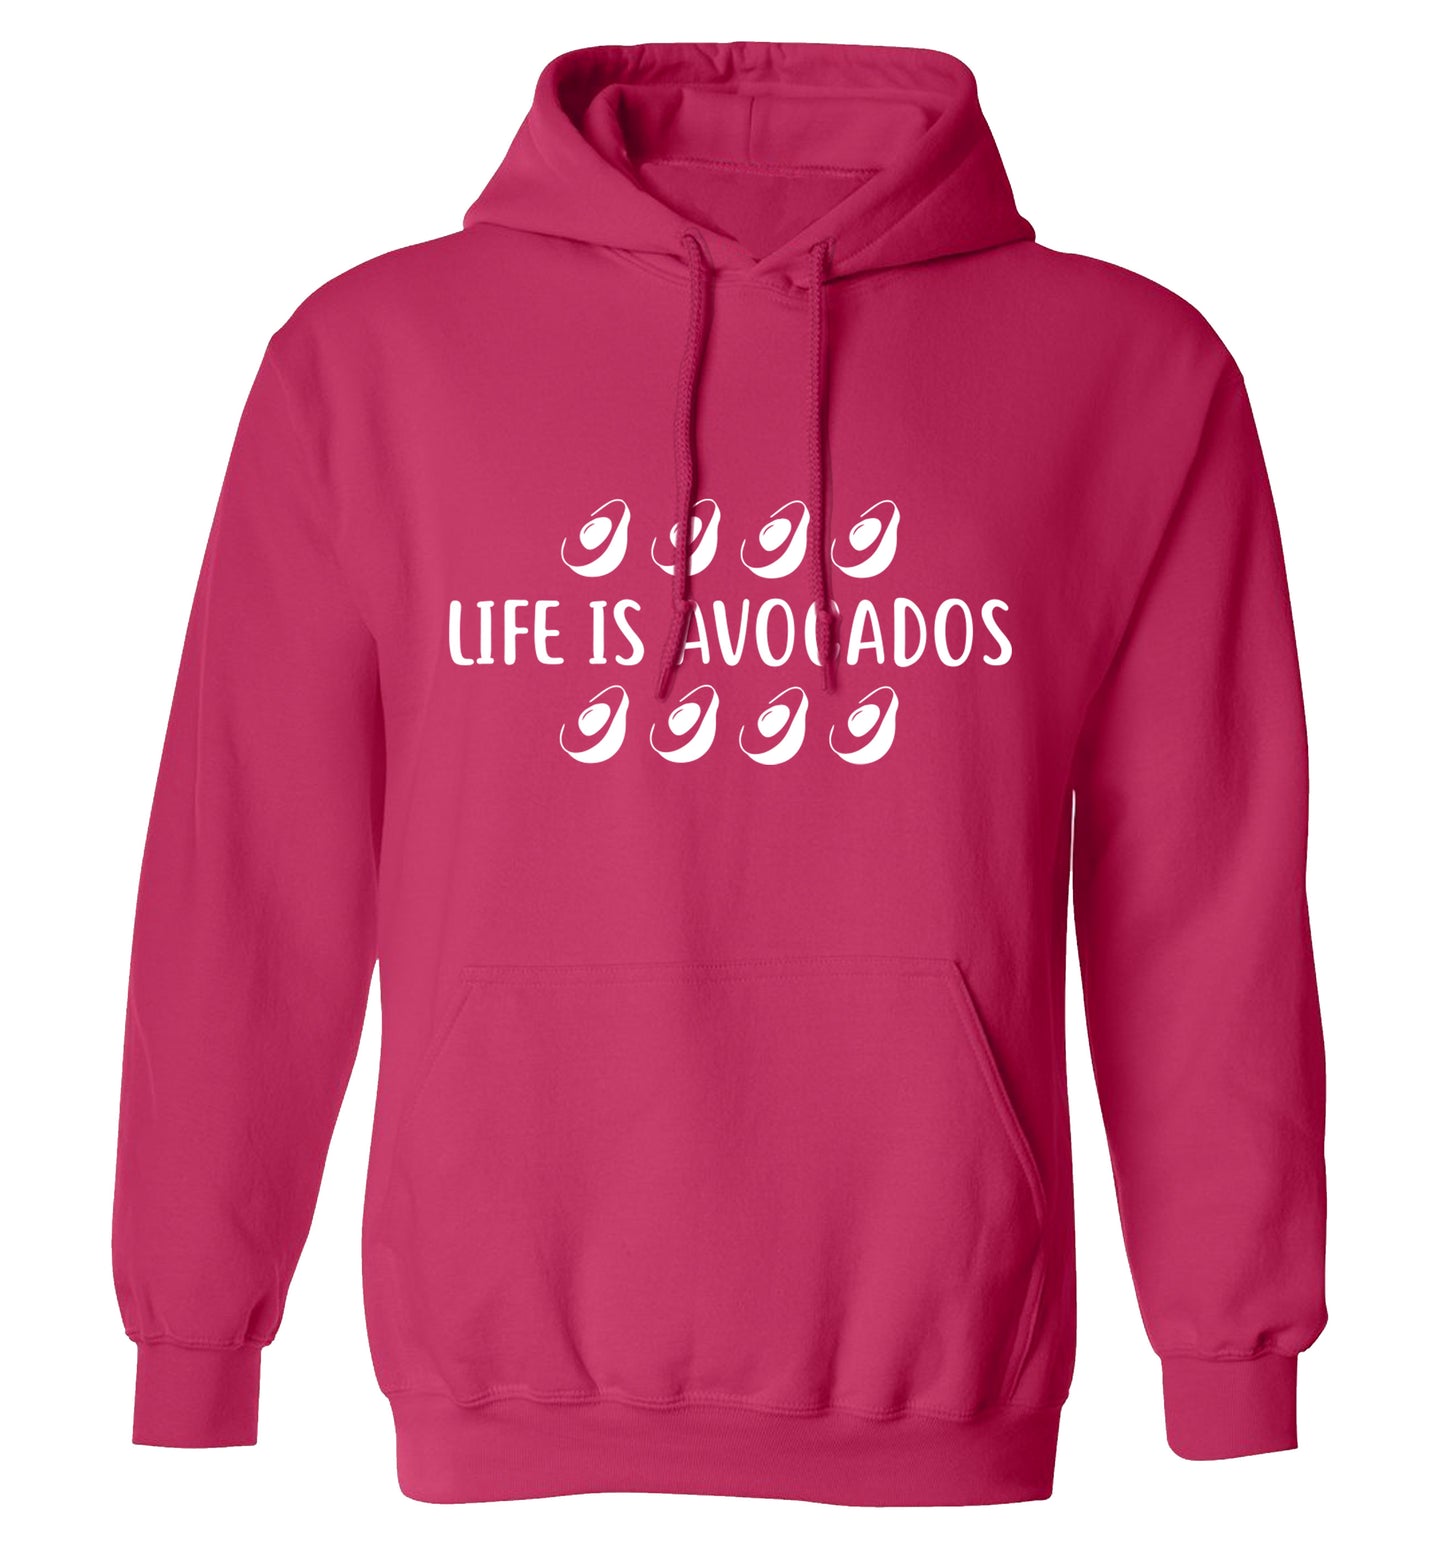 Life is avocados adults unisex pink hoodie 2XL